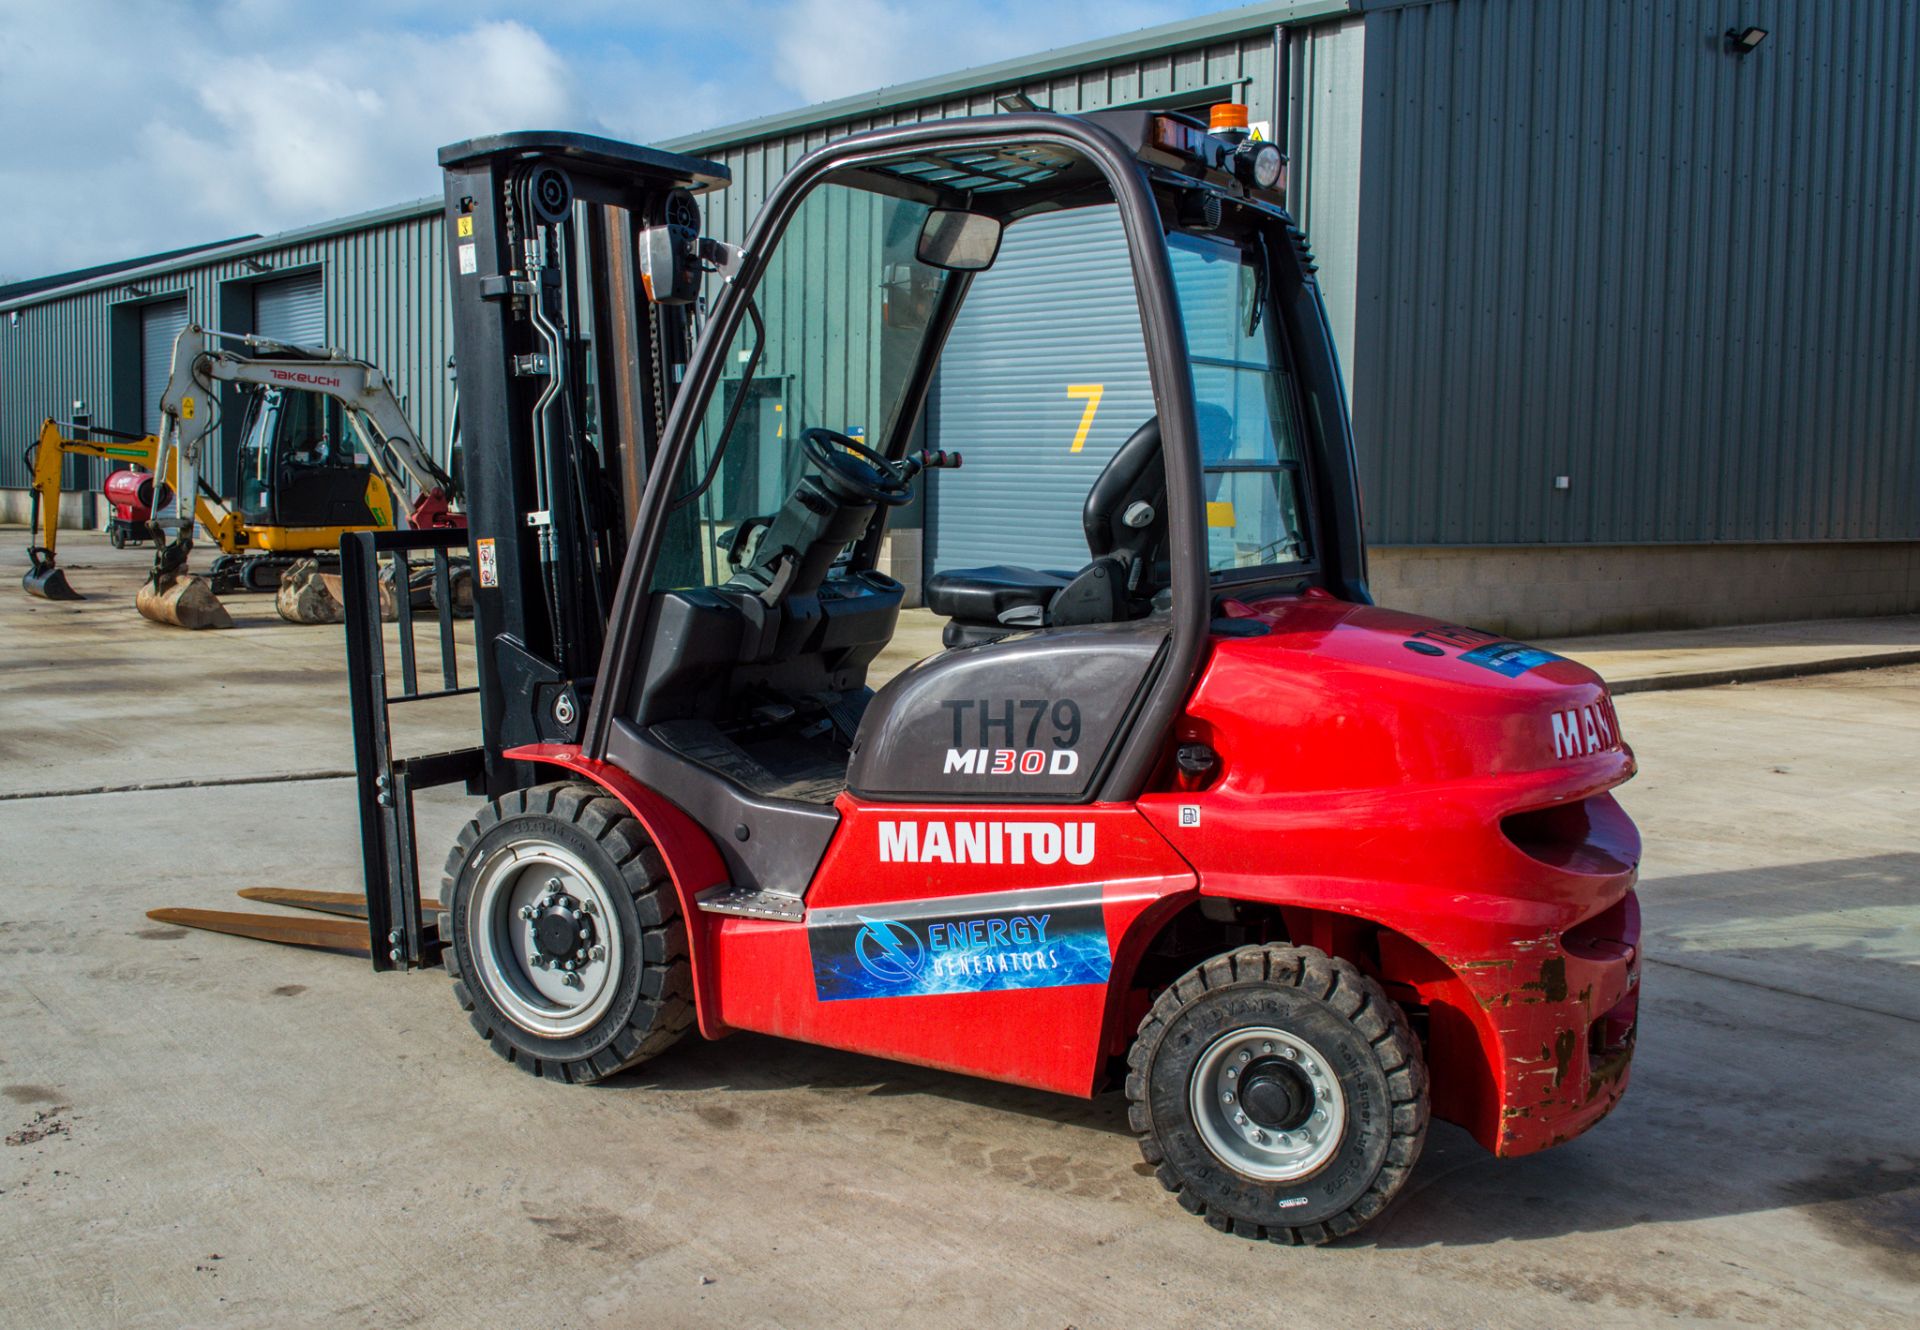 Manitou MI 30D 3 tonne diesel fork lift truck Year: 2020 S/N: 877370 Recorded Hours: 399 TH79 - Image 4 of 14